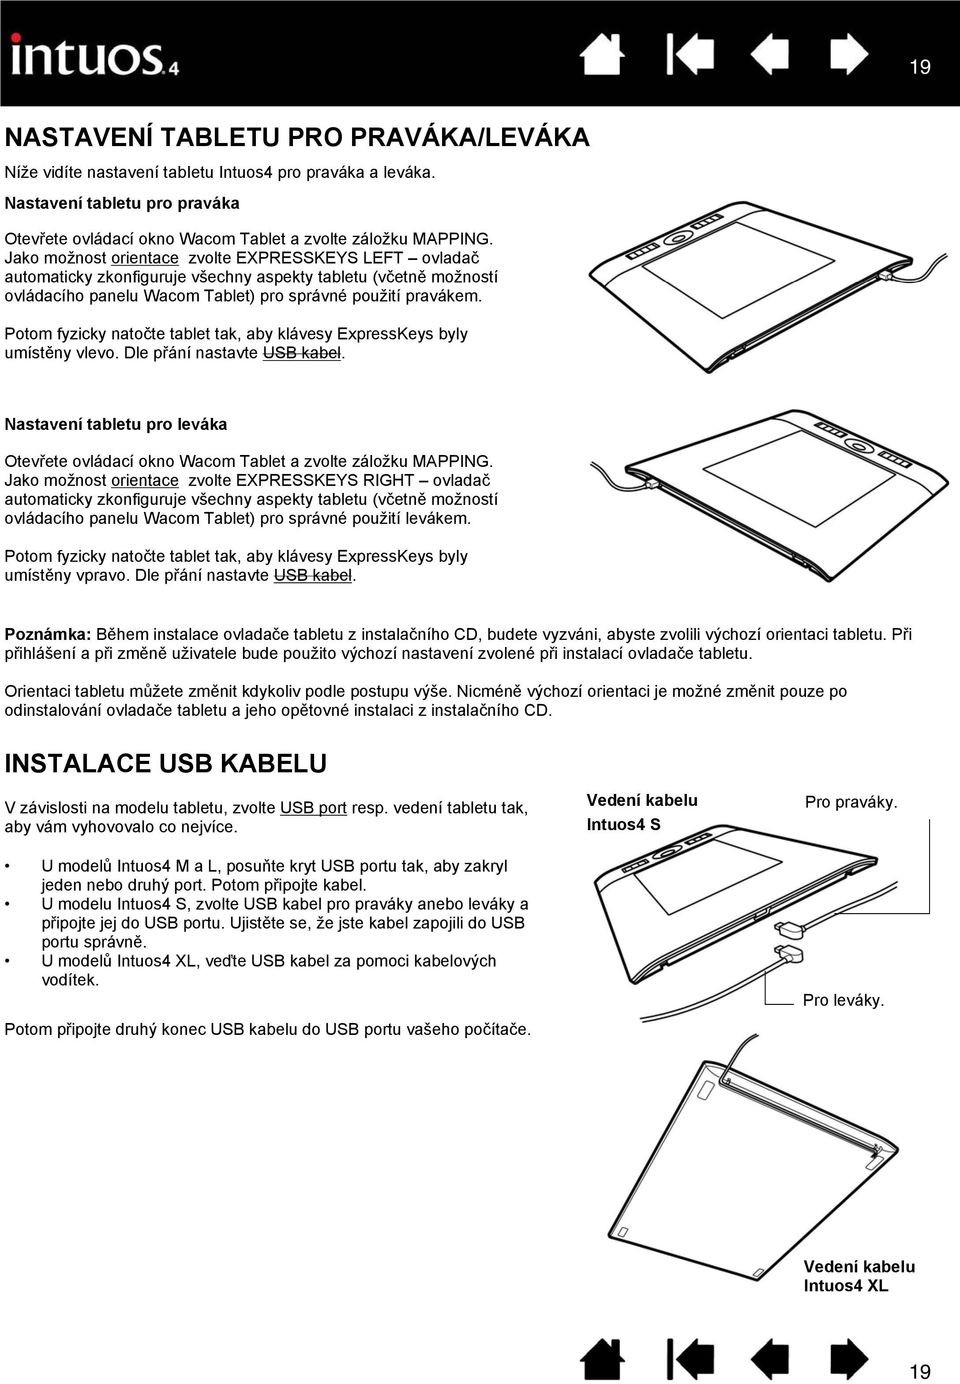 Choose the EXPRESSKEYS LEFT orientation option the tablet driver automatically configures all aspects of the tablet (including the Wacom Tablet control panel options) for correct right-handed use.